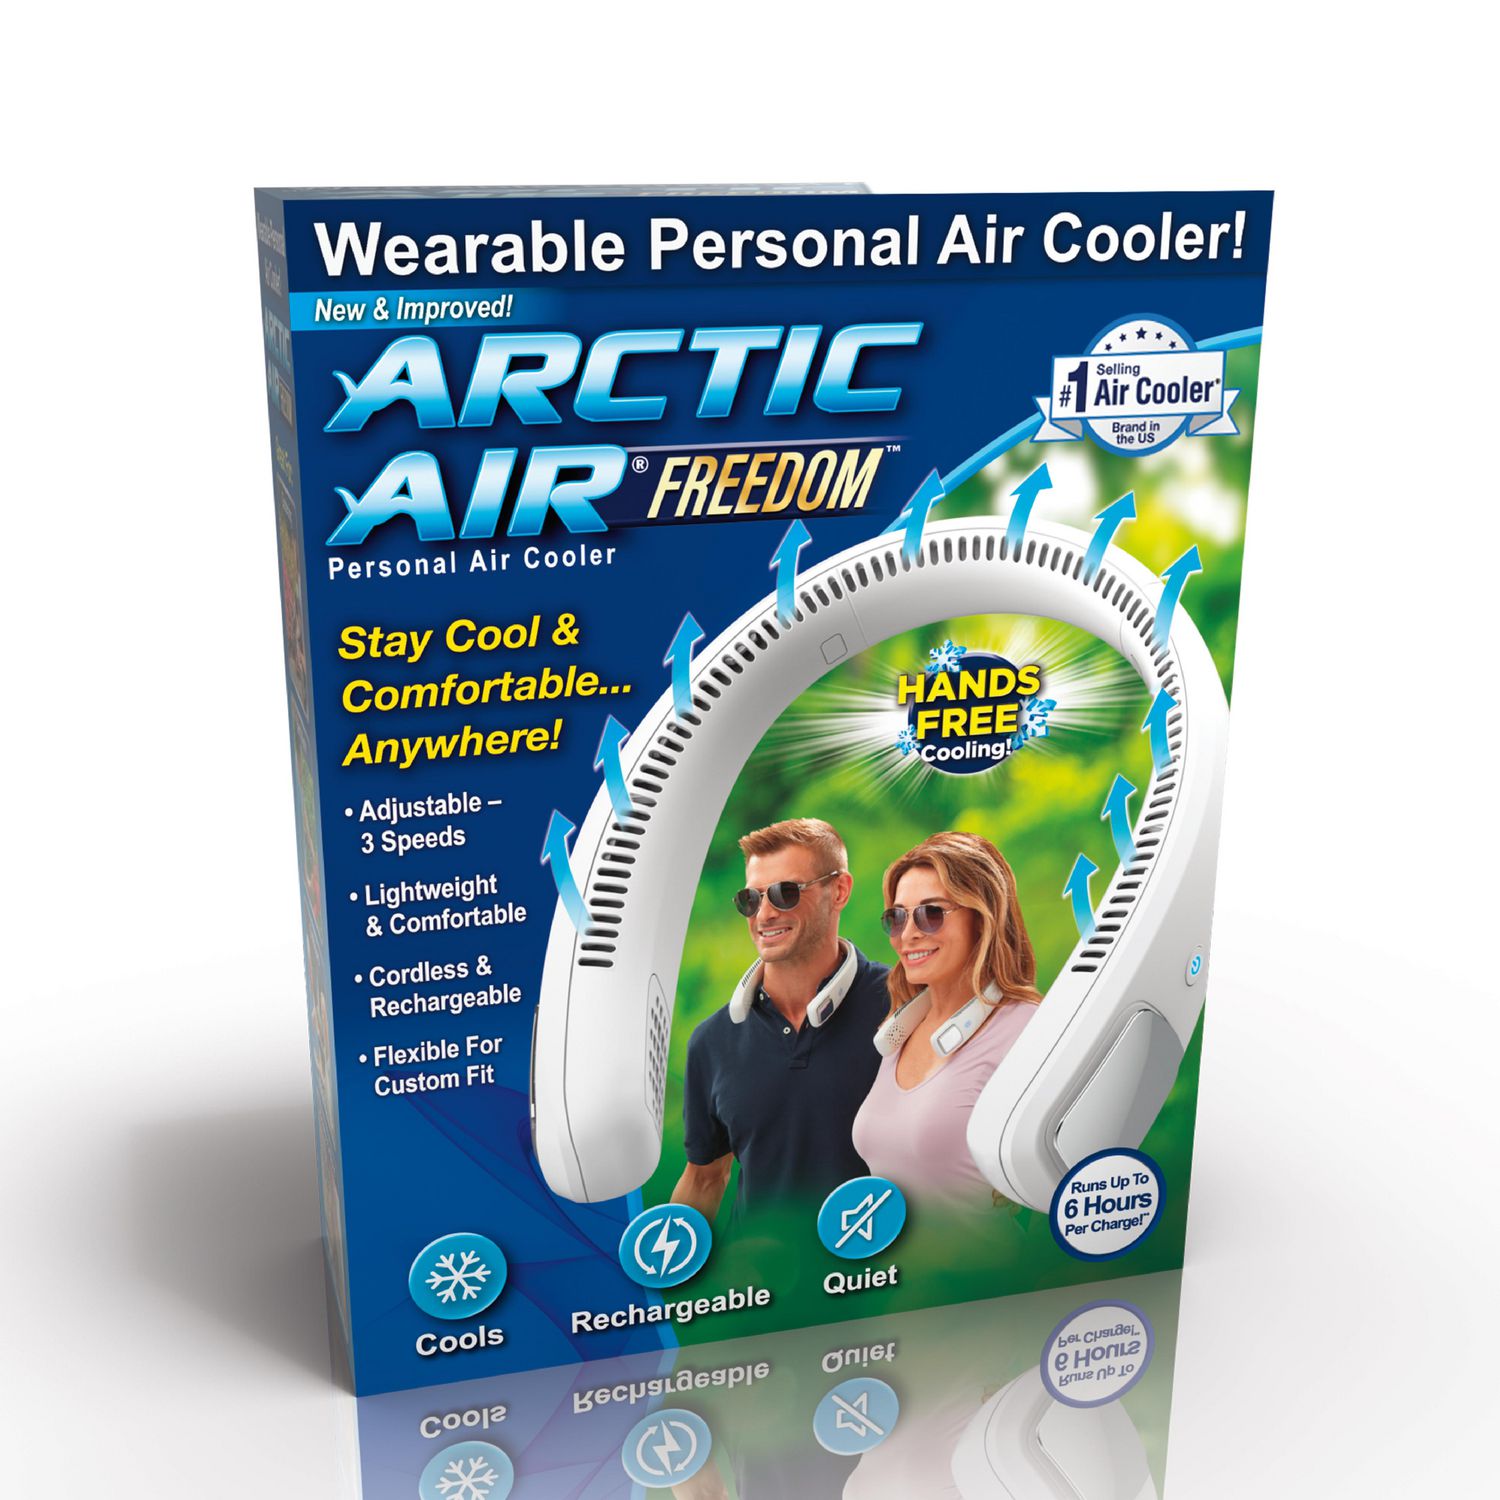 Arctic Air Freedom Personal Air Cooler Portable Wearable Air